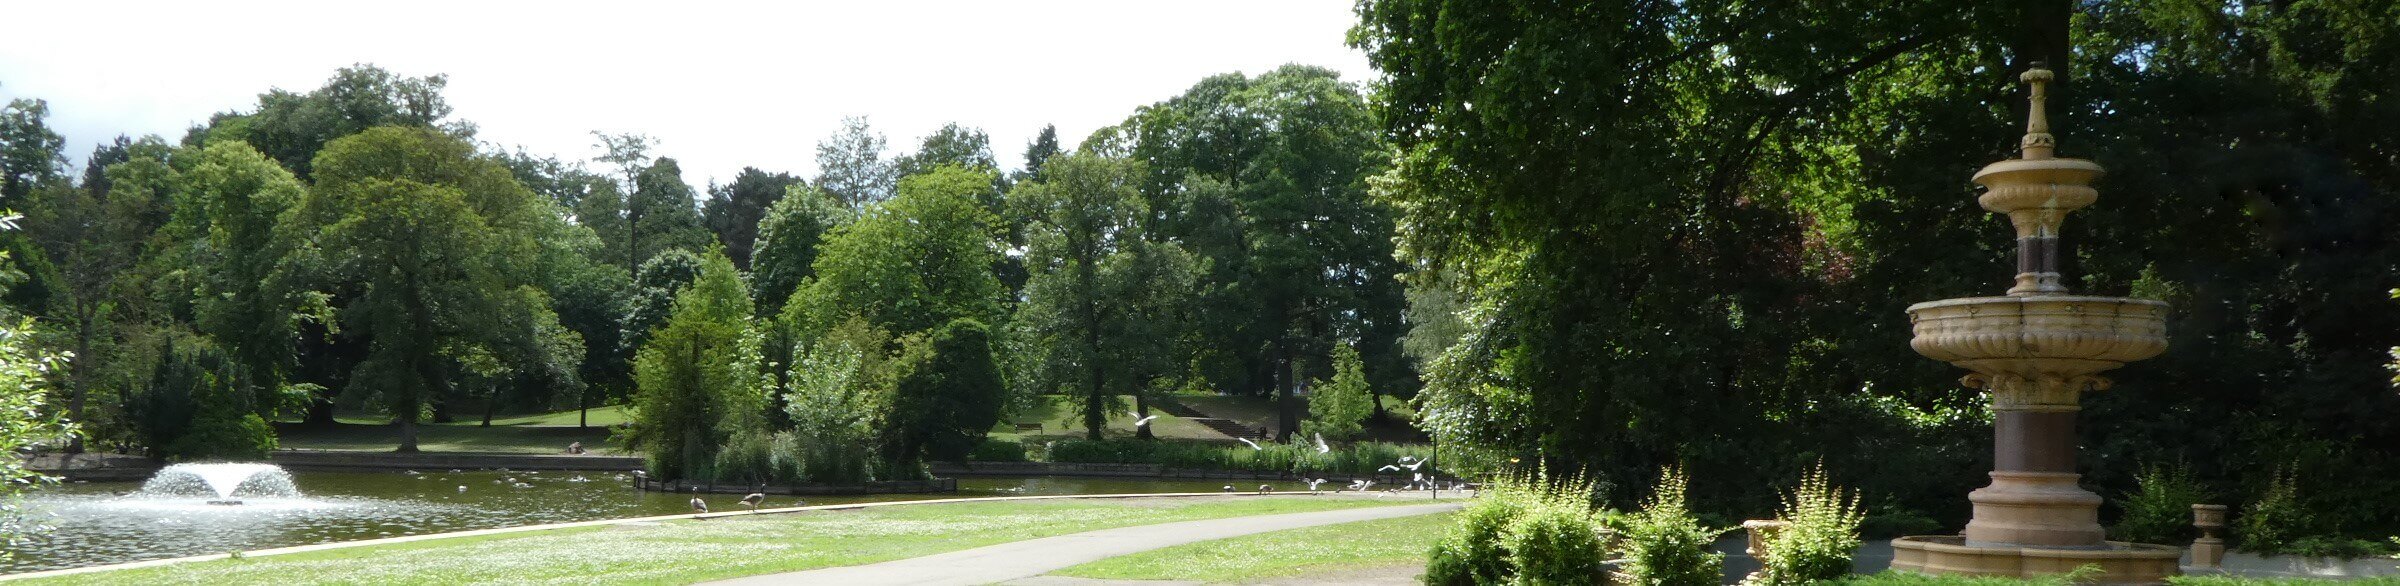 The pond surround by trees in South Park